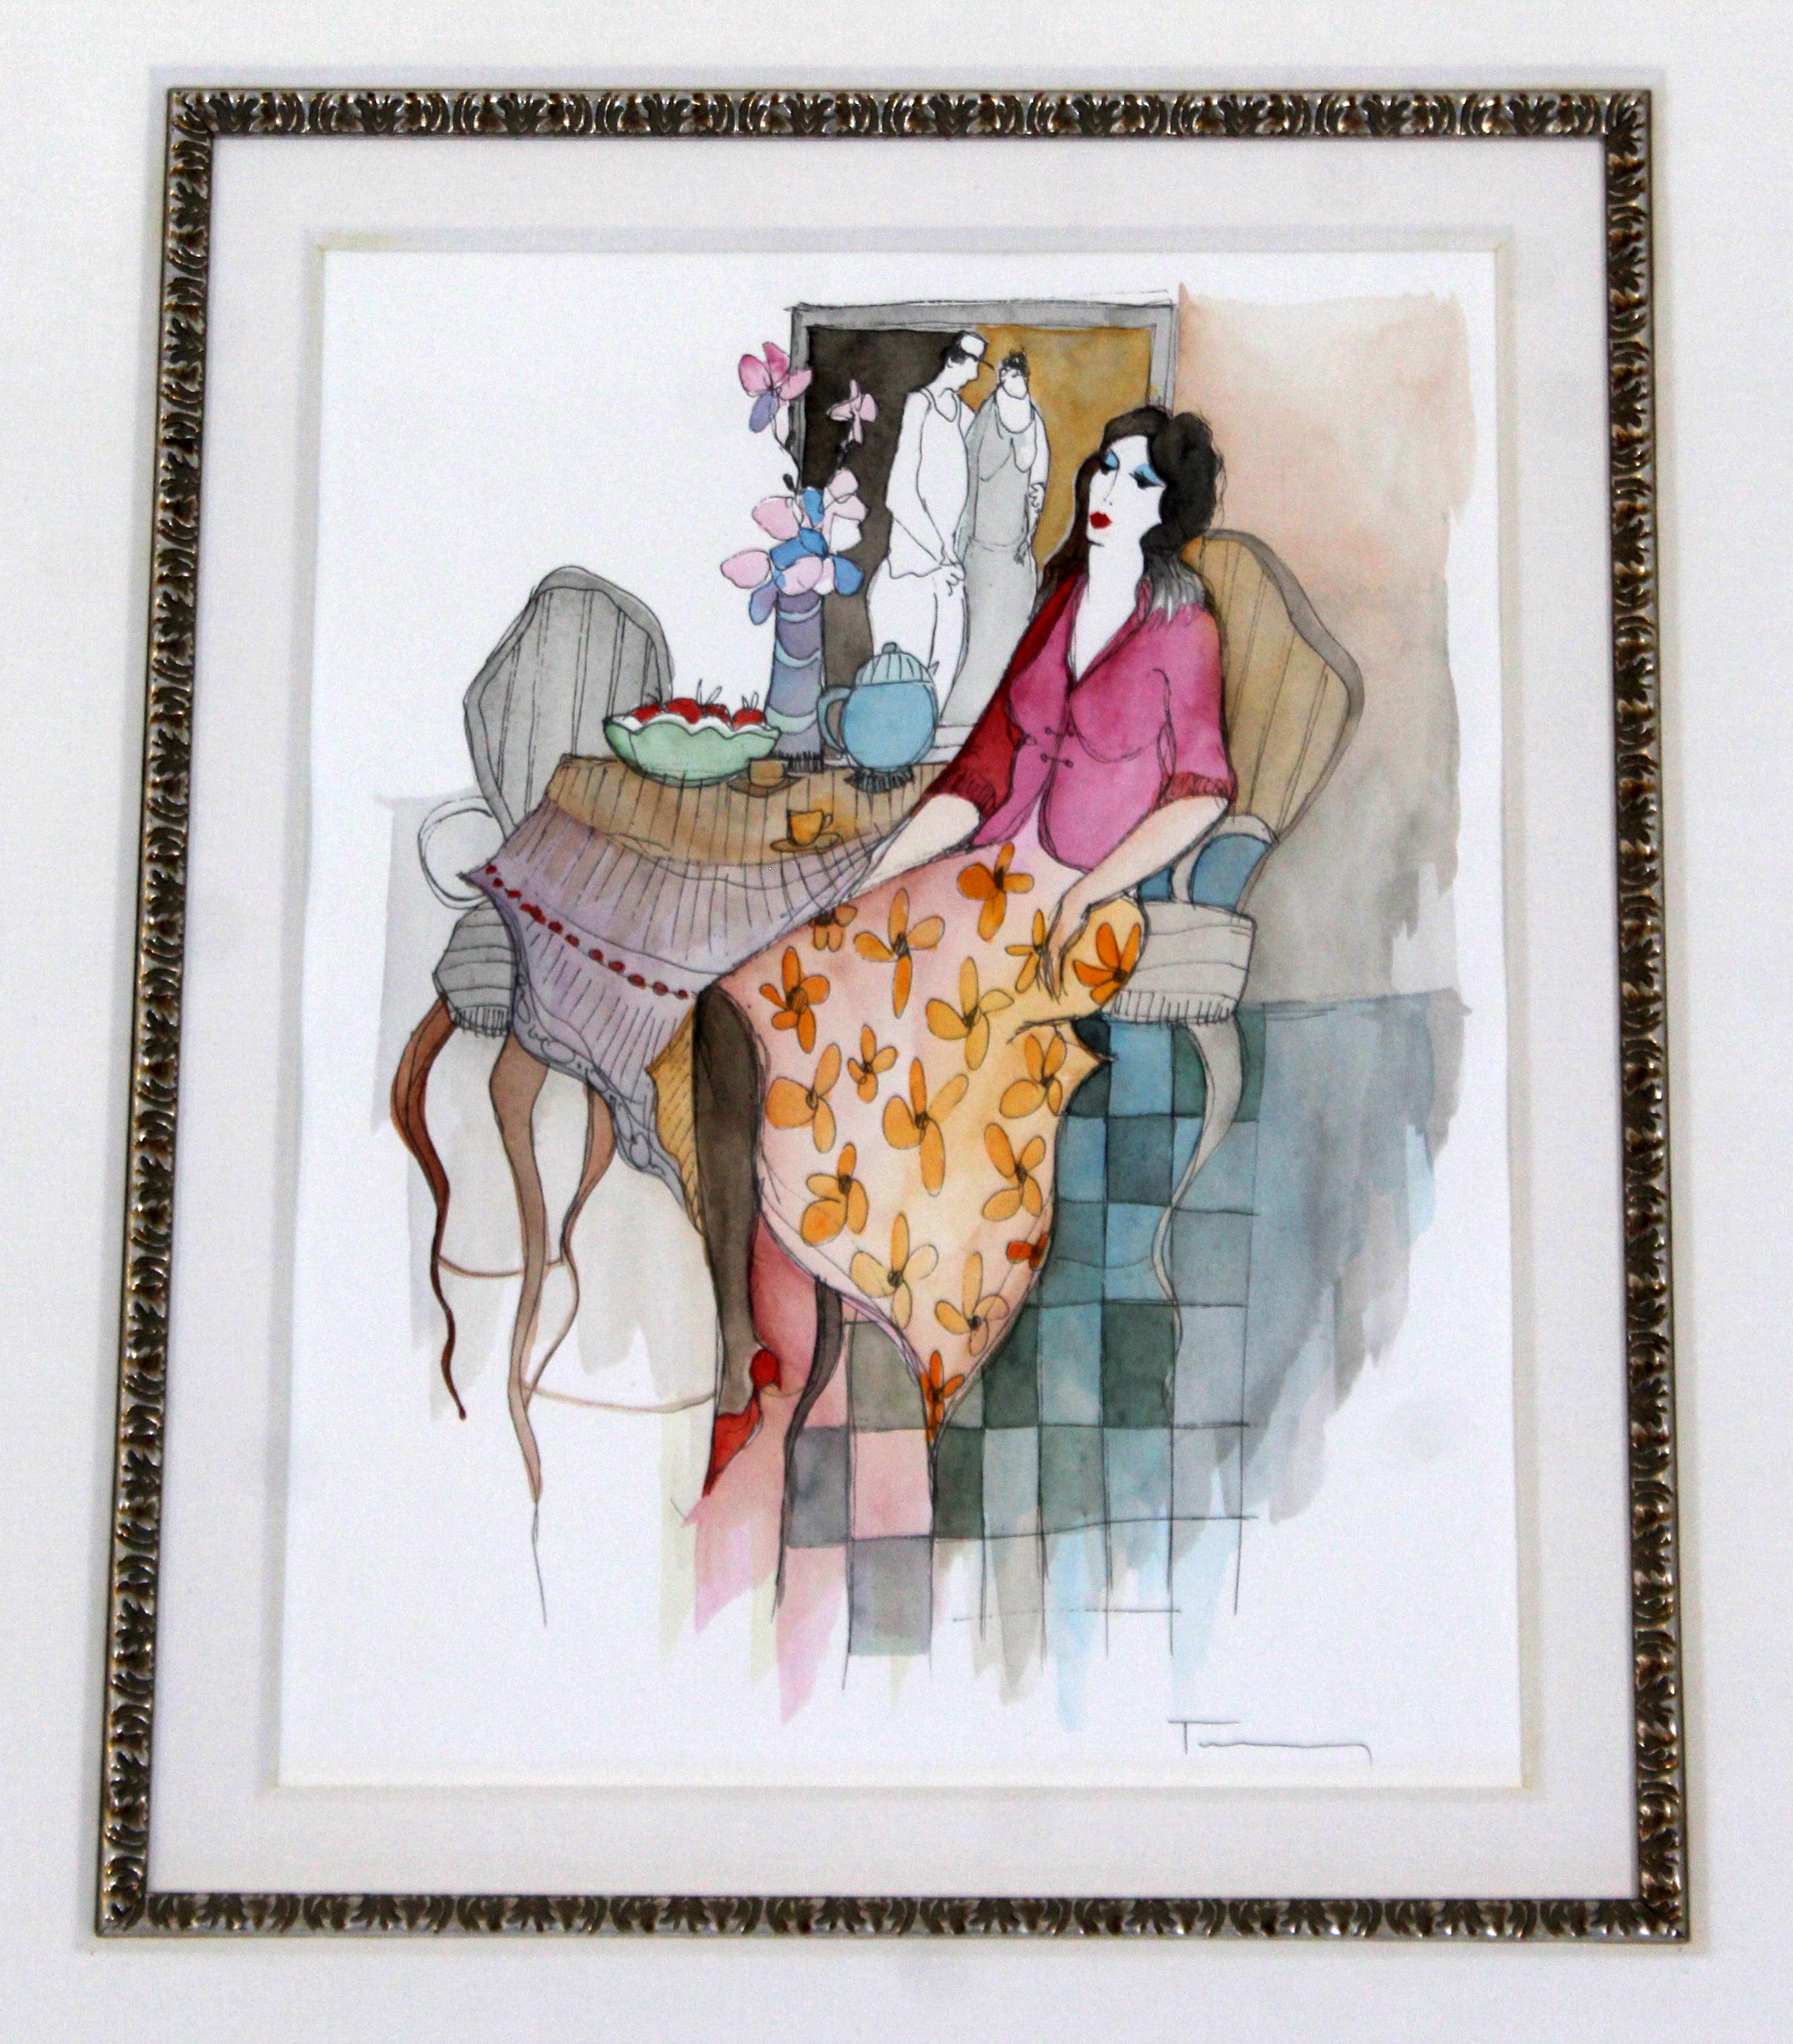 For your consideration is a wonderful unique watercolor and mixed media on woven paper.  Itzchak Tarkay is considered to be a key figure in the modern figurative movement.  Artwork by the Israeli artist are easily recognizable and captures people